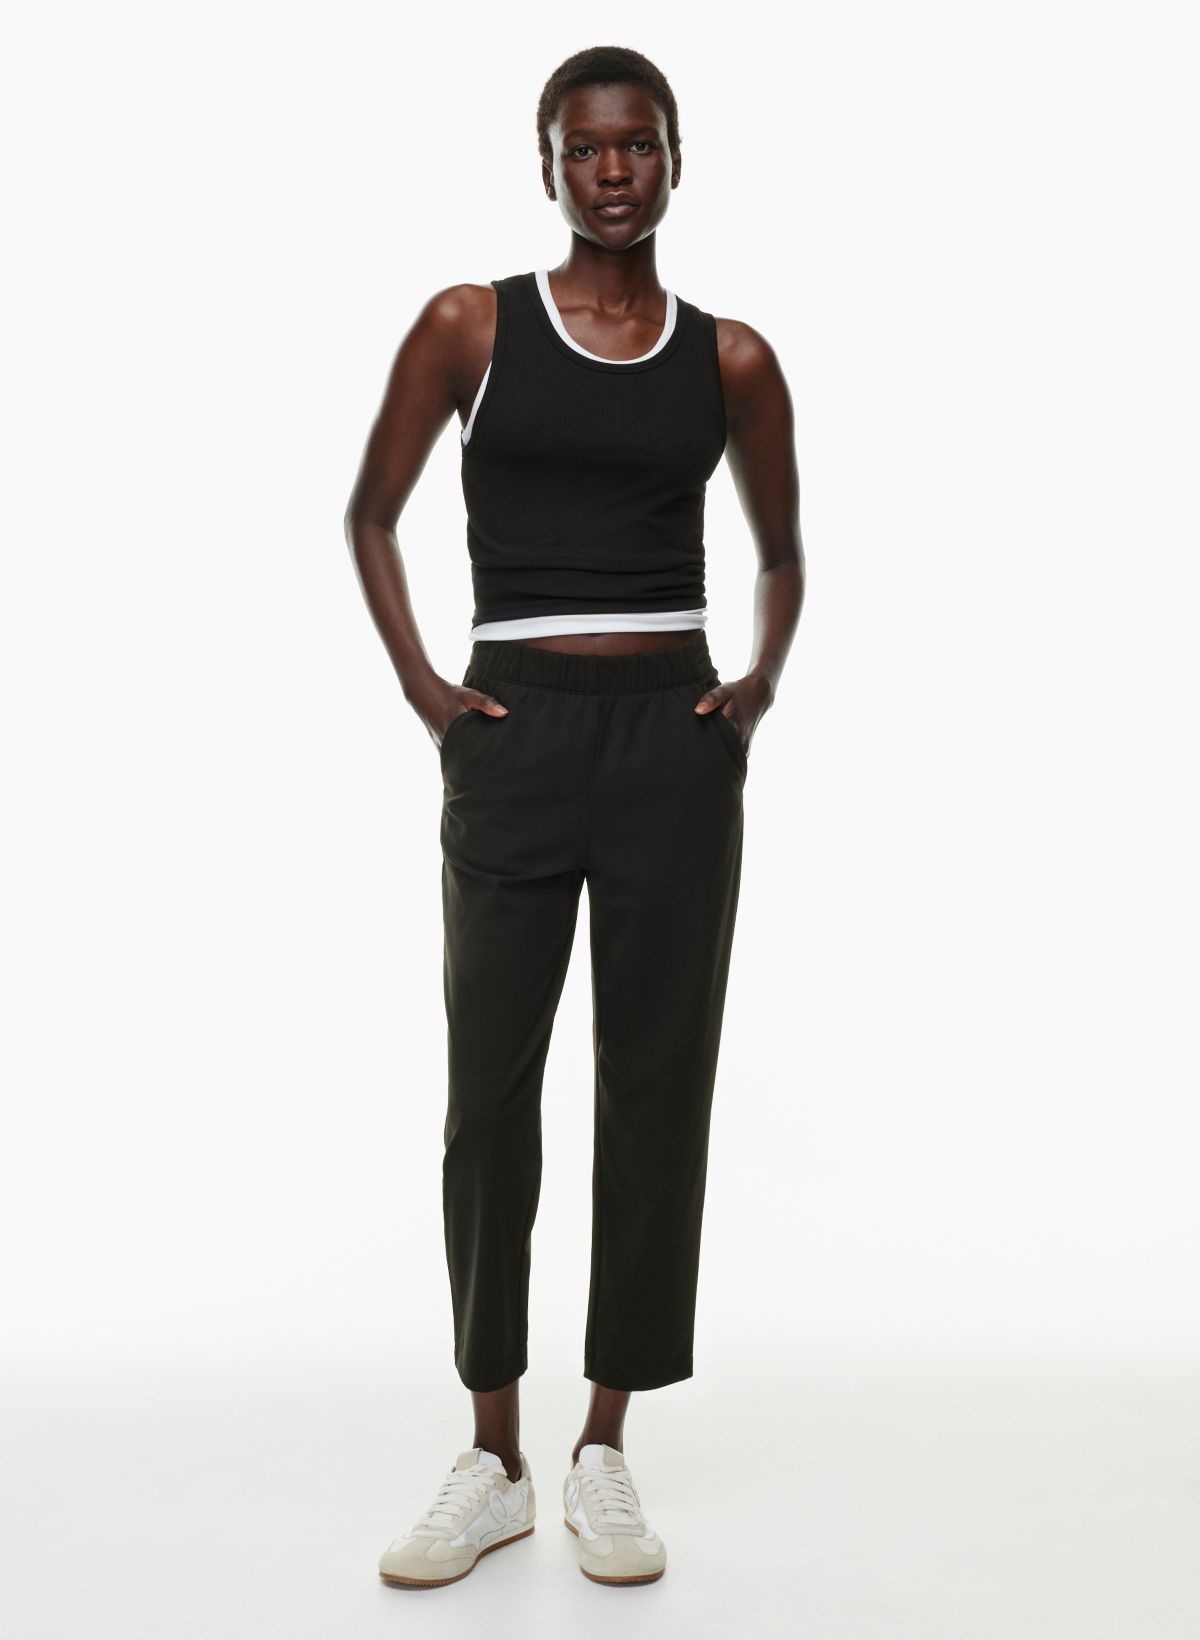 Popfit - on sale up to 90% Off Activewear, Pants, Shoes & More